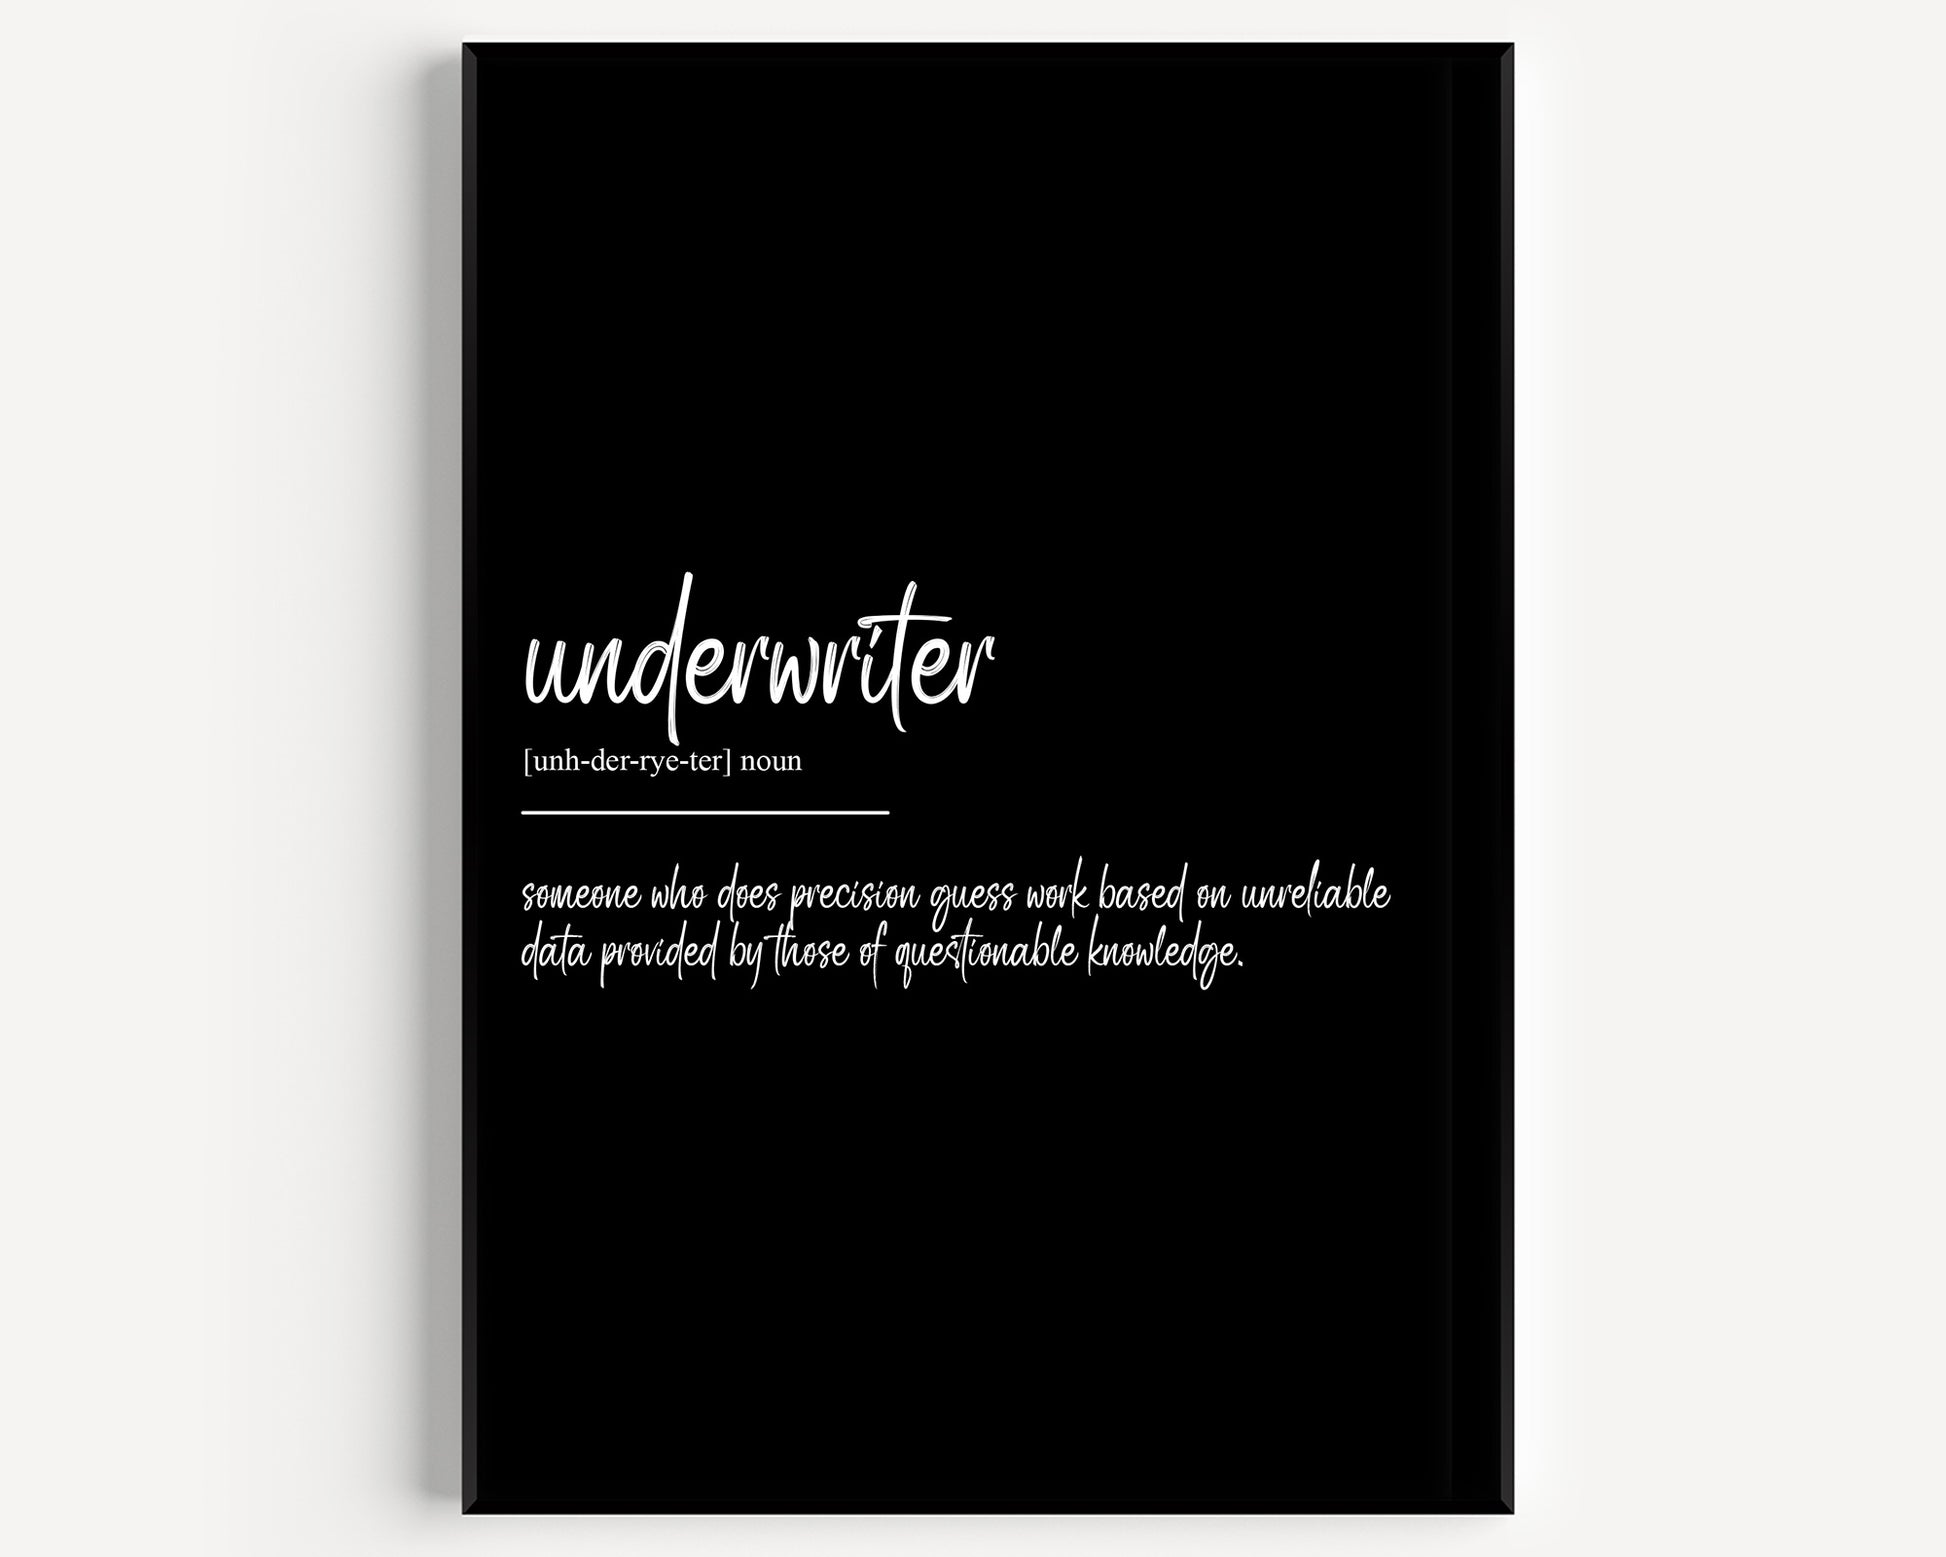 Underwriter Definition Print - Magic Posters